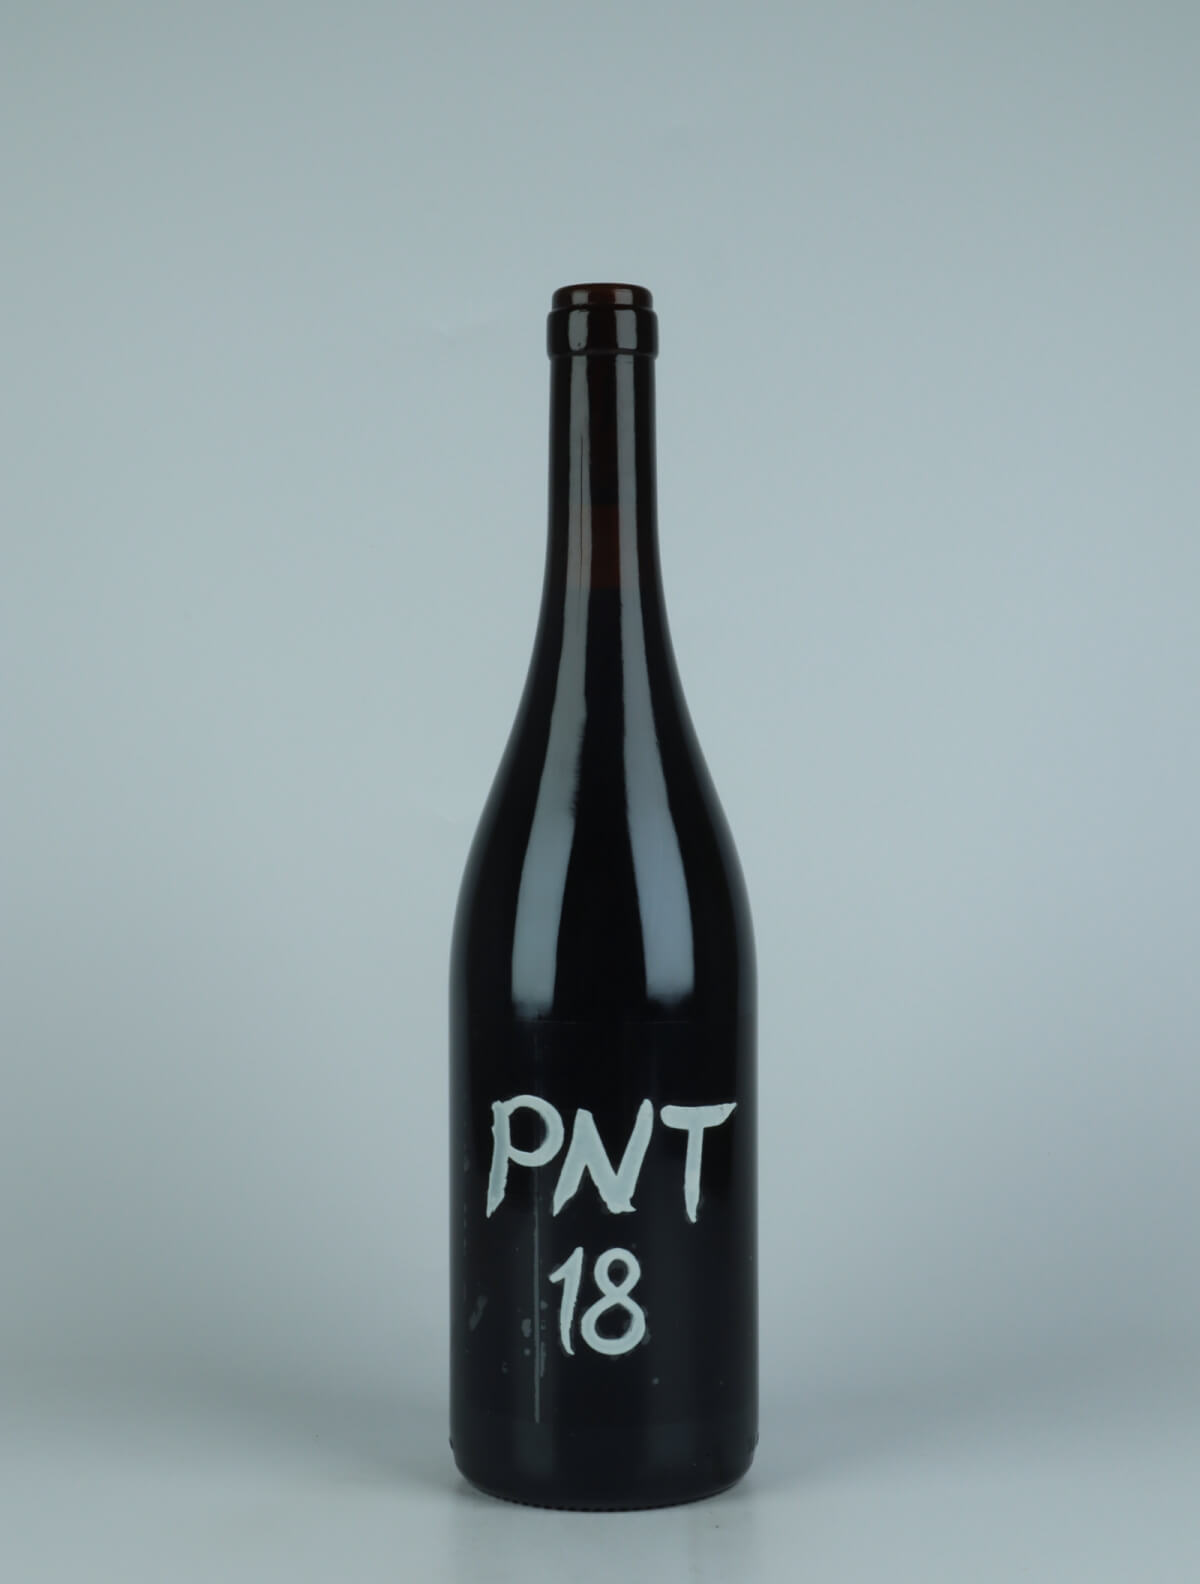 A bottle 2018 PNT Red wine from Le Coste, Lazio in Italy